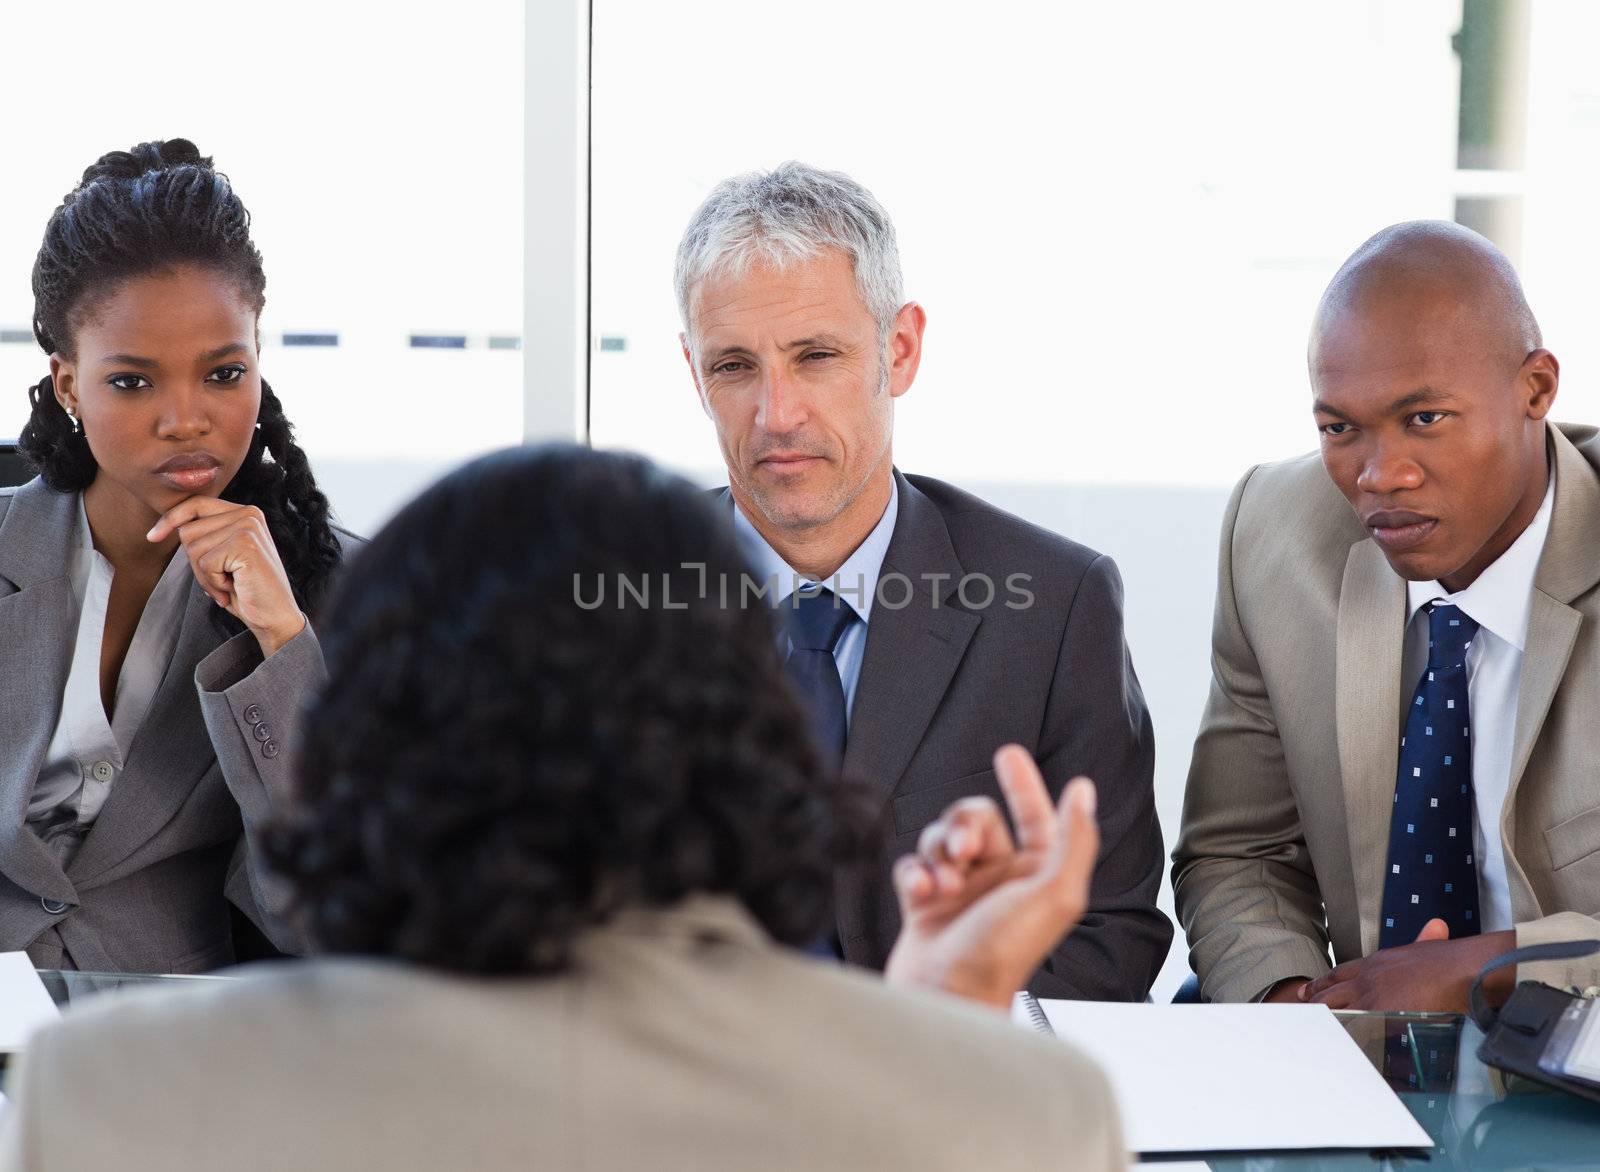 Business people attentively listening to a serious speaker in a meeting